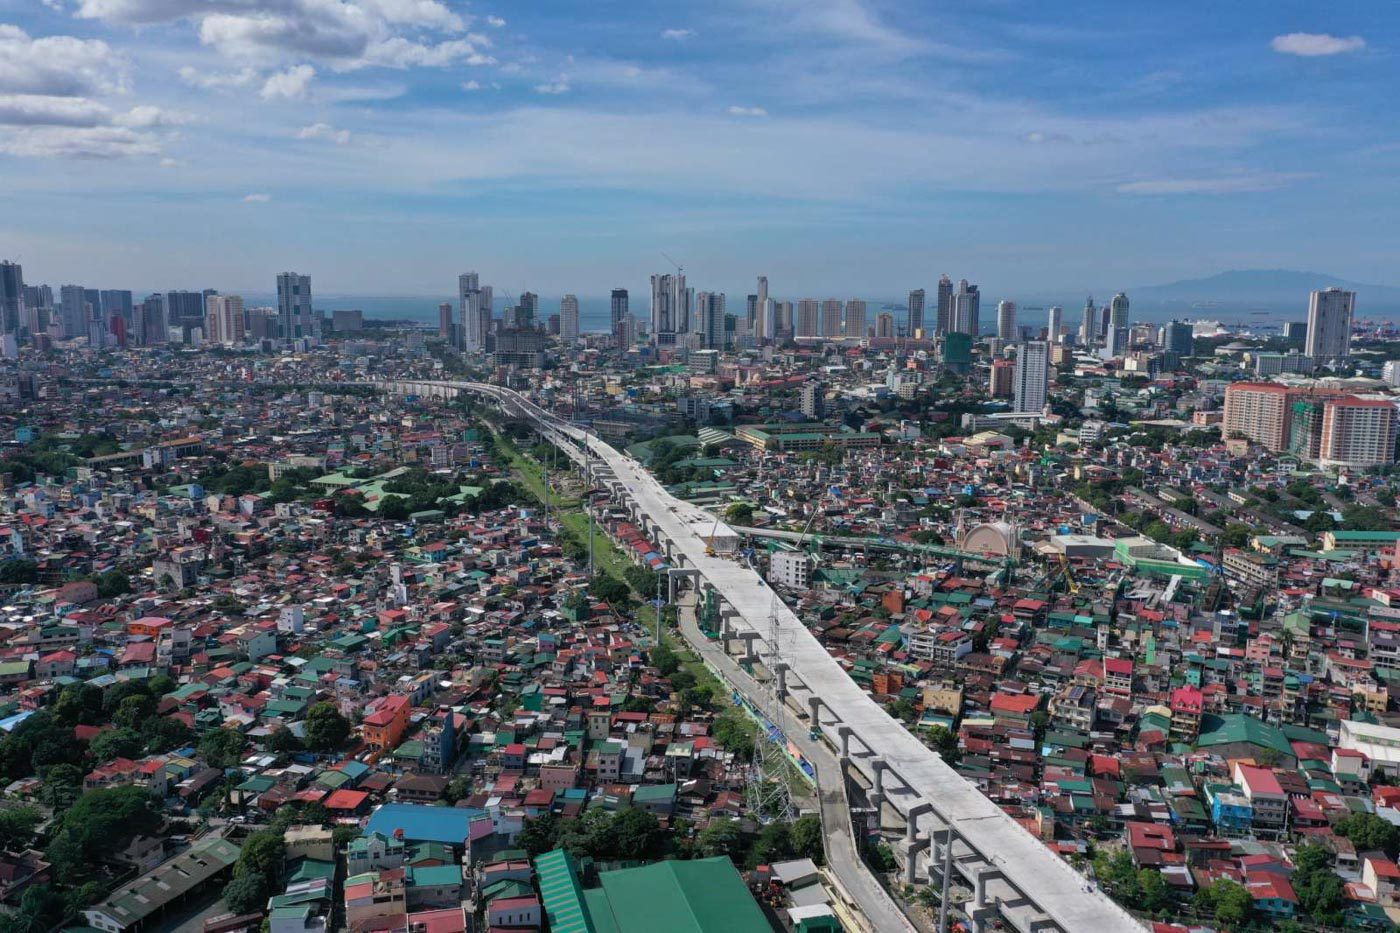 Skyway 3 to remain open, says Ramon Ang